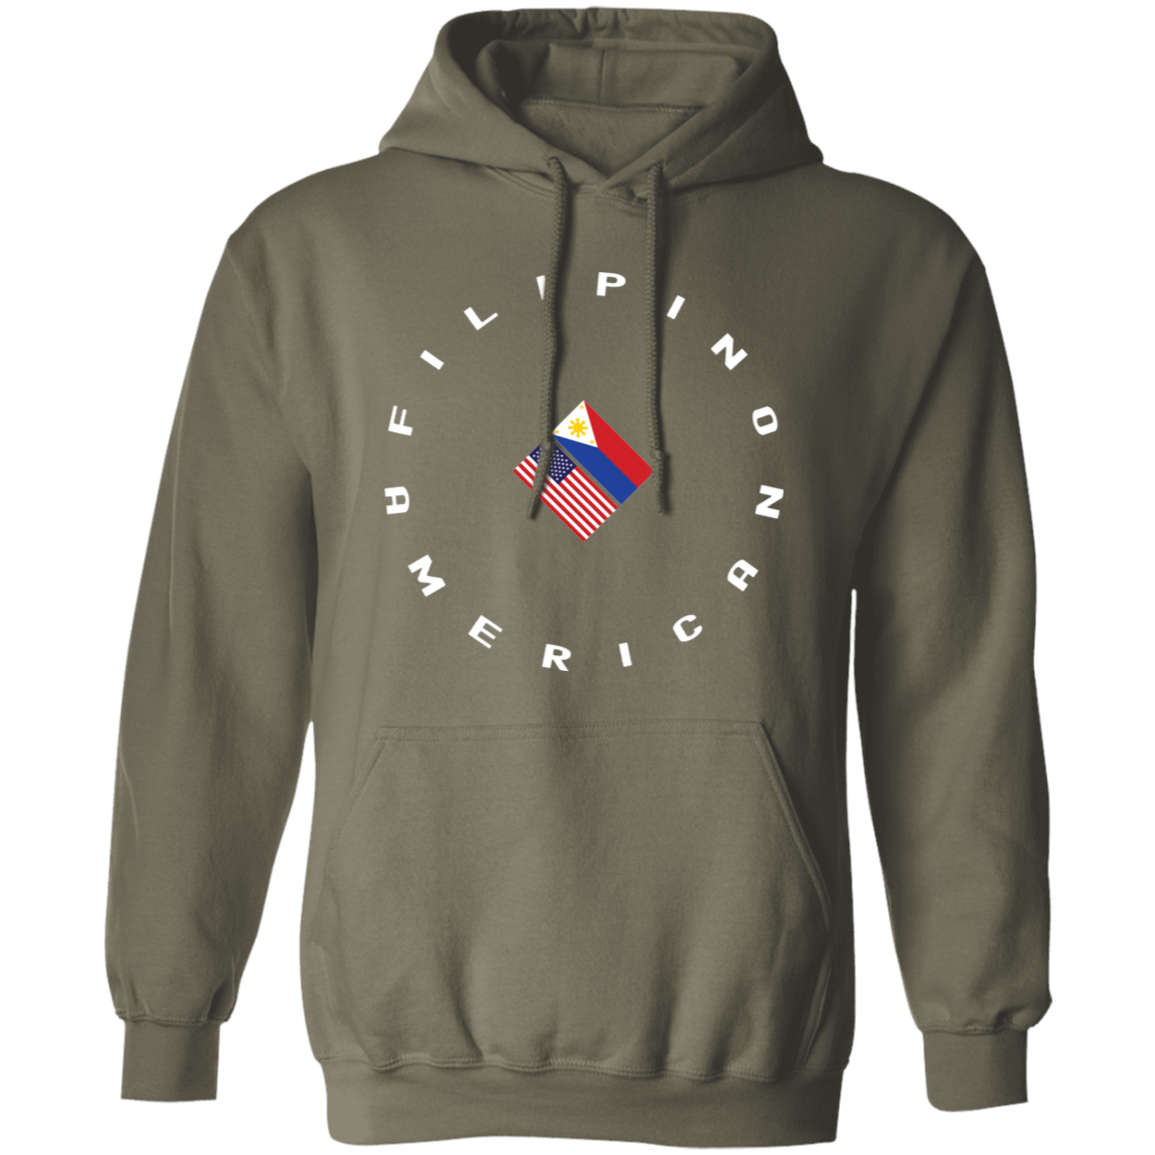 Filpino American in Circle Flags Unisex Pullover Hoodie